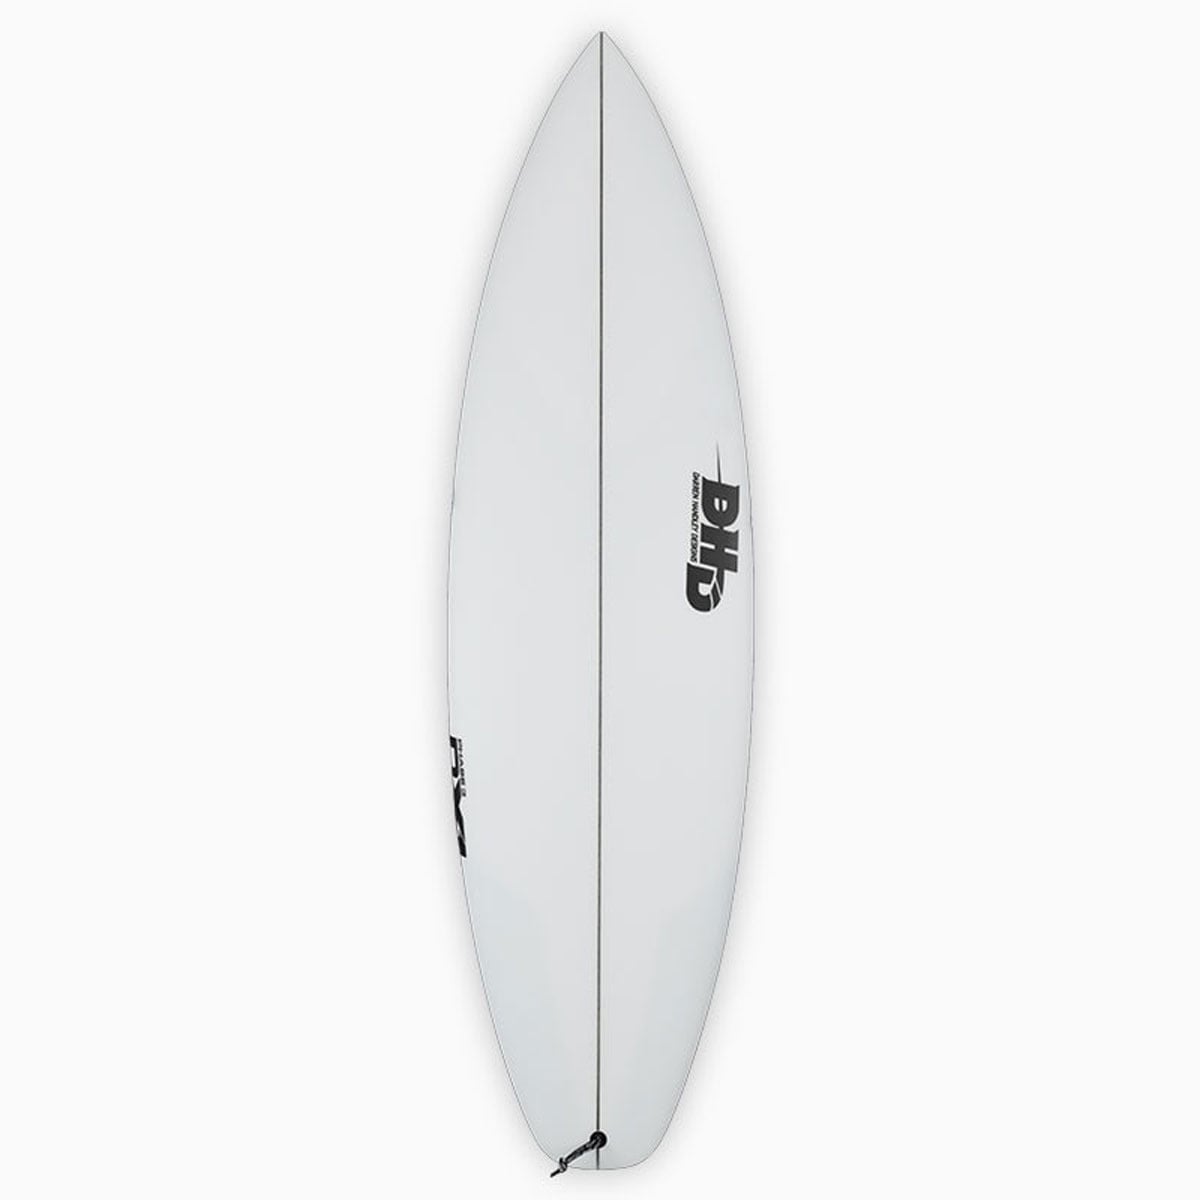 DHD SURFBOARDS DX1 PHASE3 ダレンハンドレーデザイン ディーエックス1 フェーズ3 ショートボード パフォーマンスショート  FCS2 サーフボード トライフィン クリア 5.7